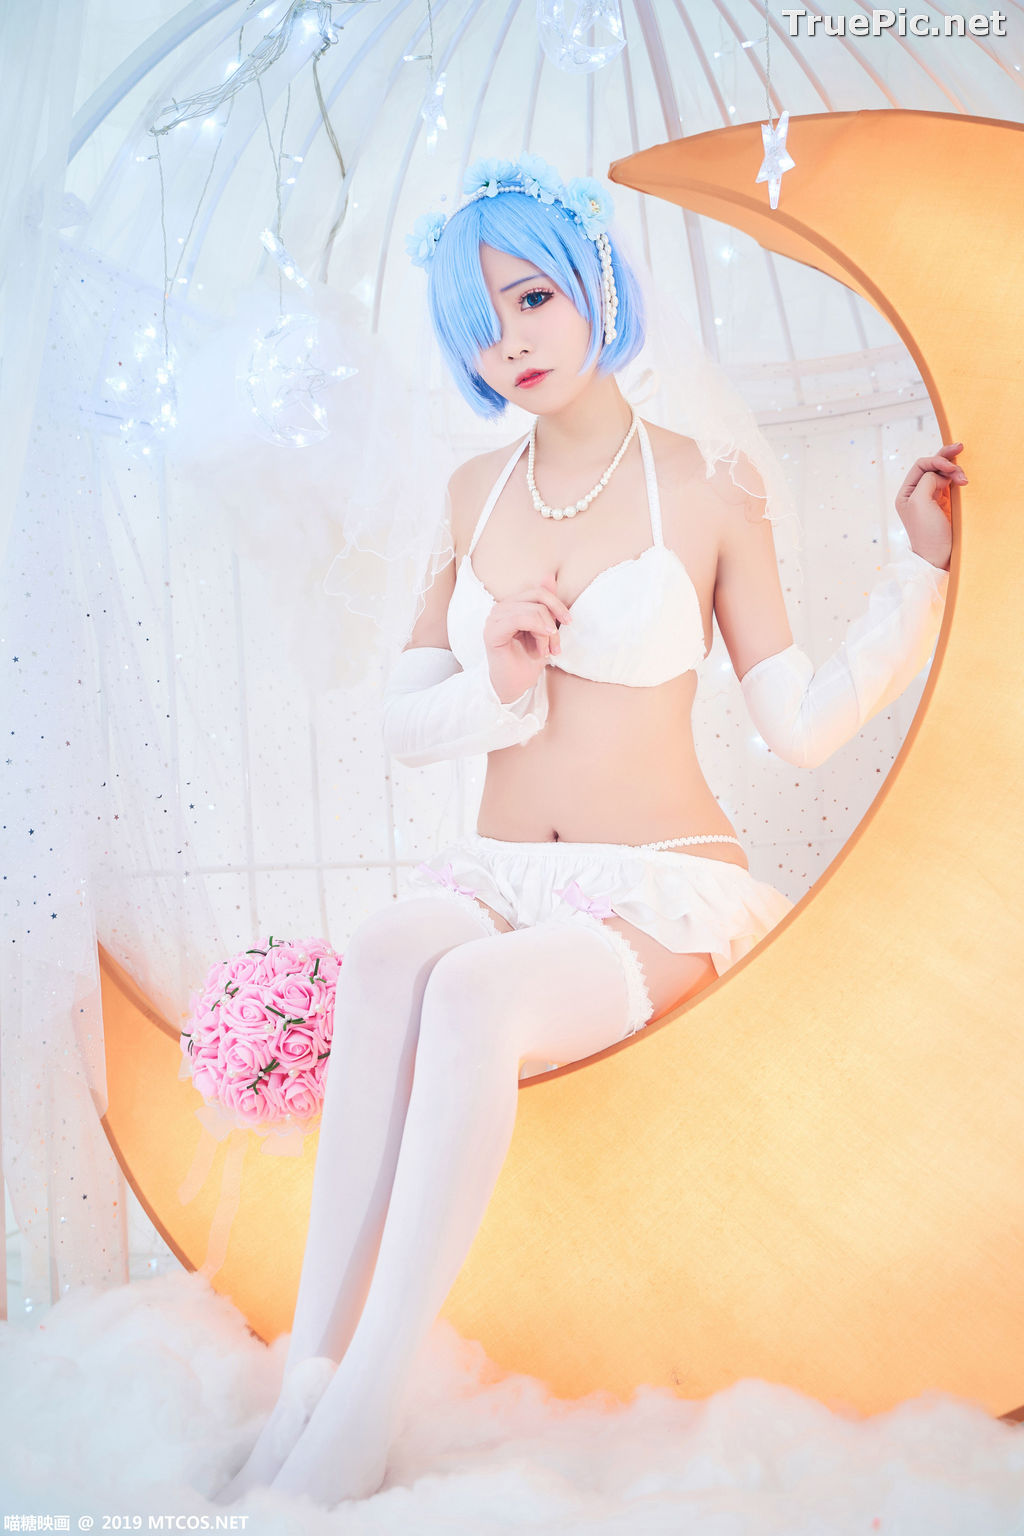 Image [MTCos] 喵糖映画 Vol.043 – Chinese Cute Model – Sexy Rem Cosplay - TruePic.net - Picture-13